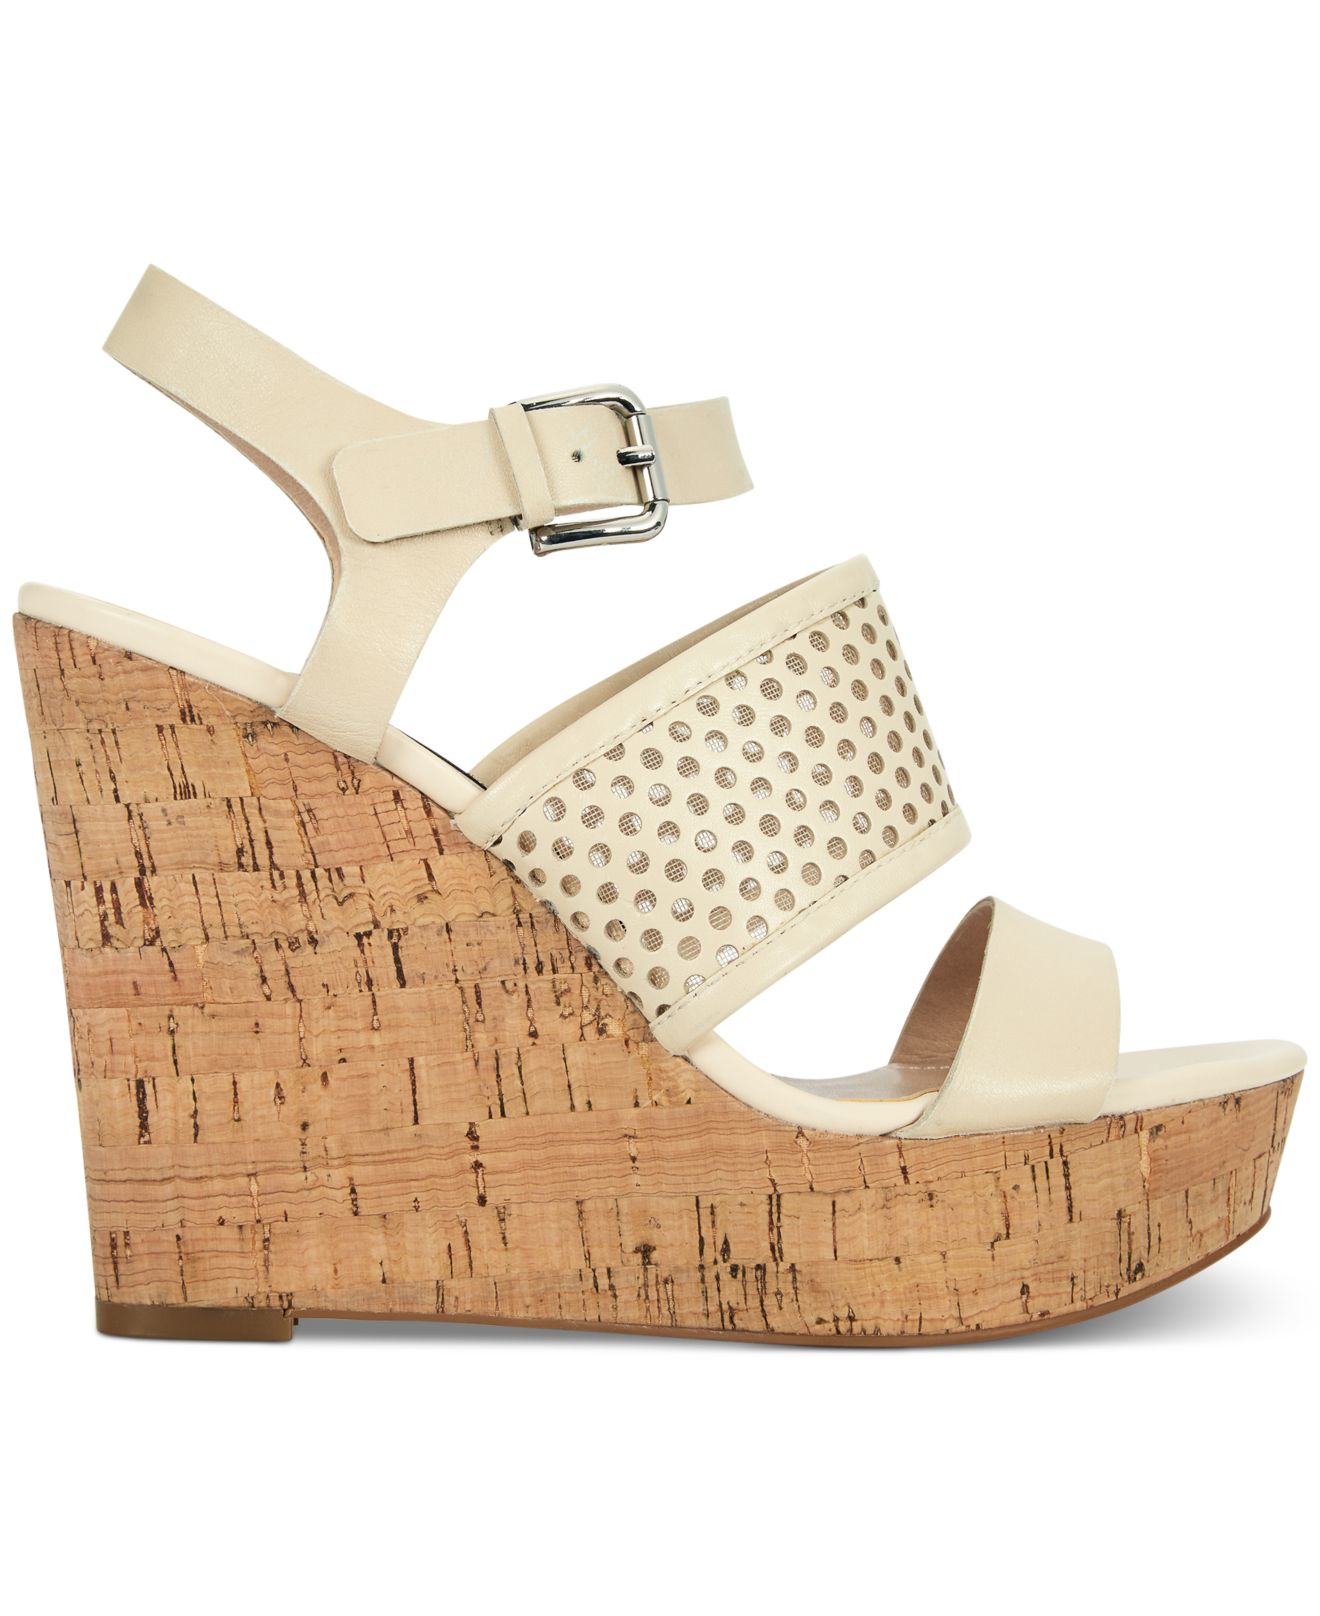 Lyst French Connection  Devi Platform Wedge Sandals  in White